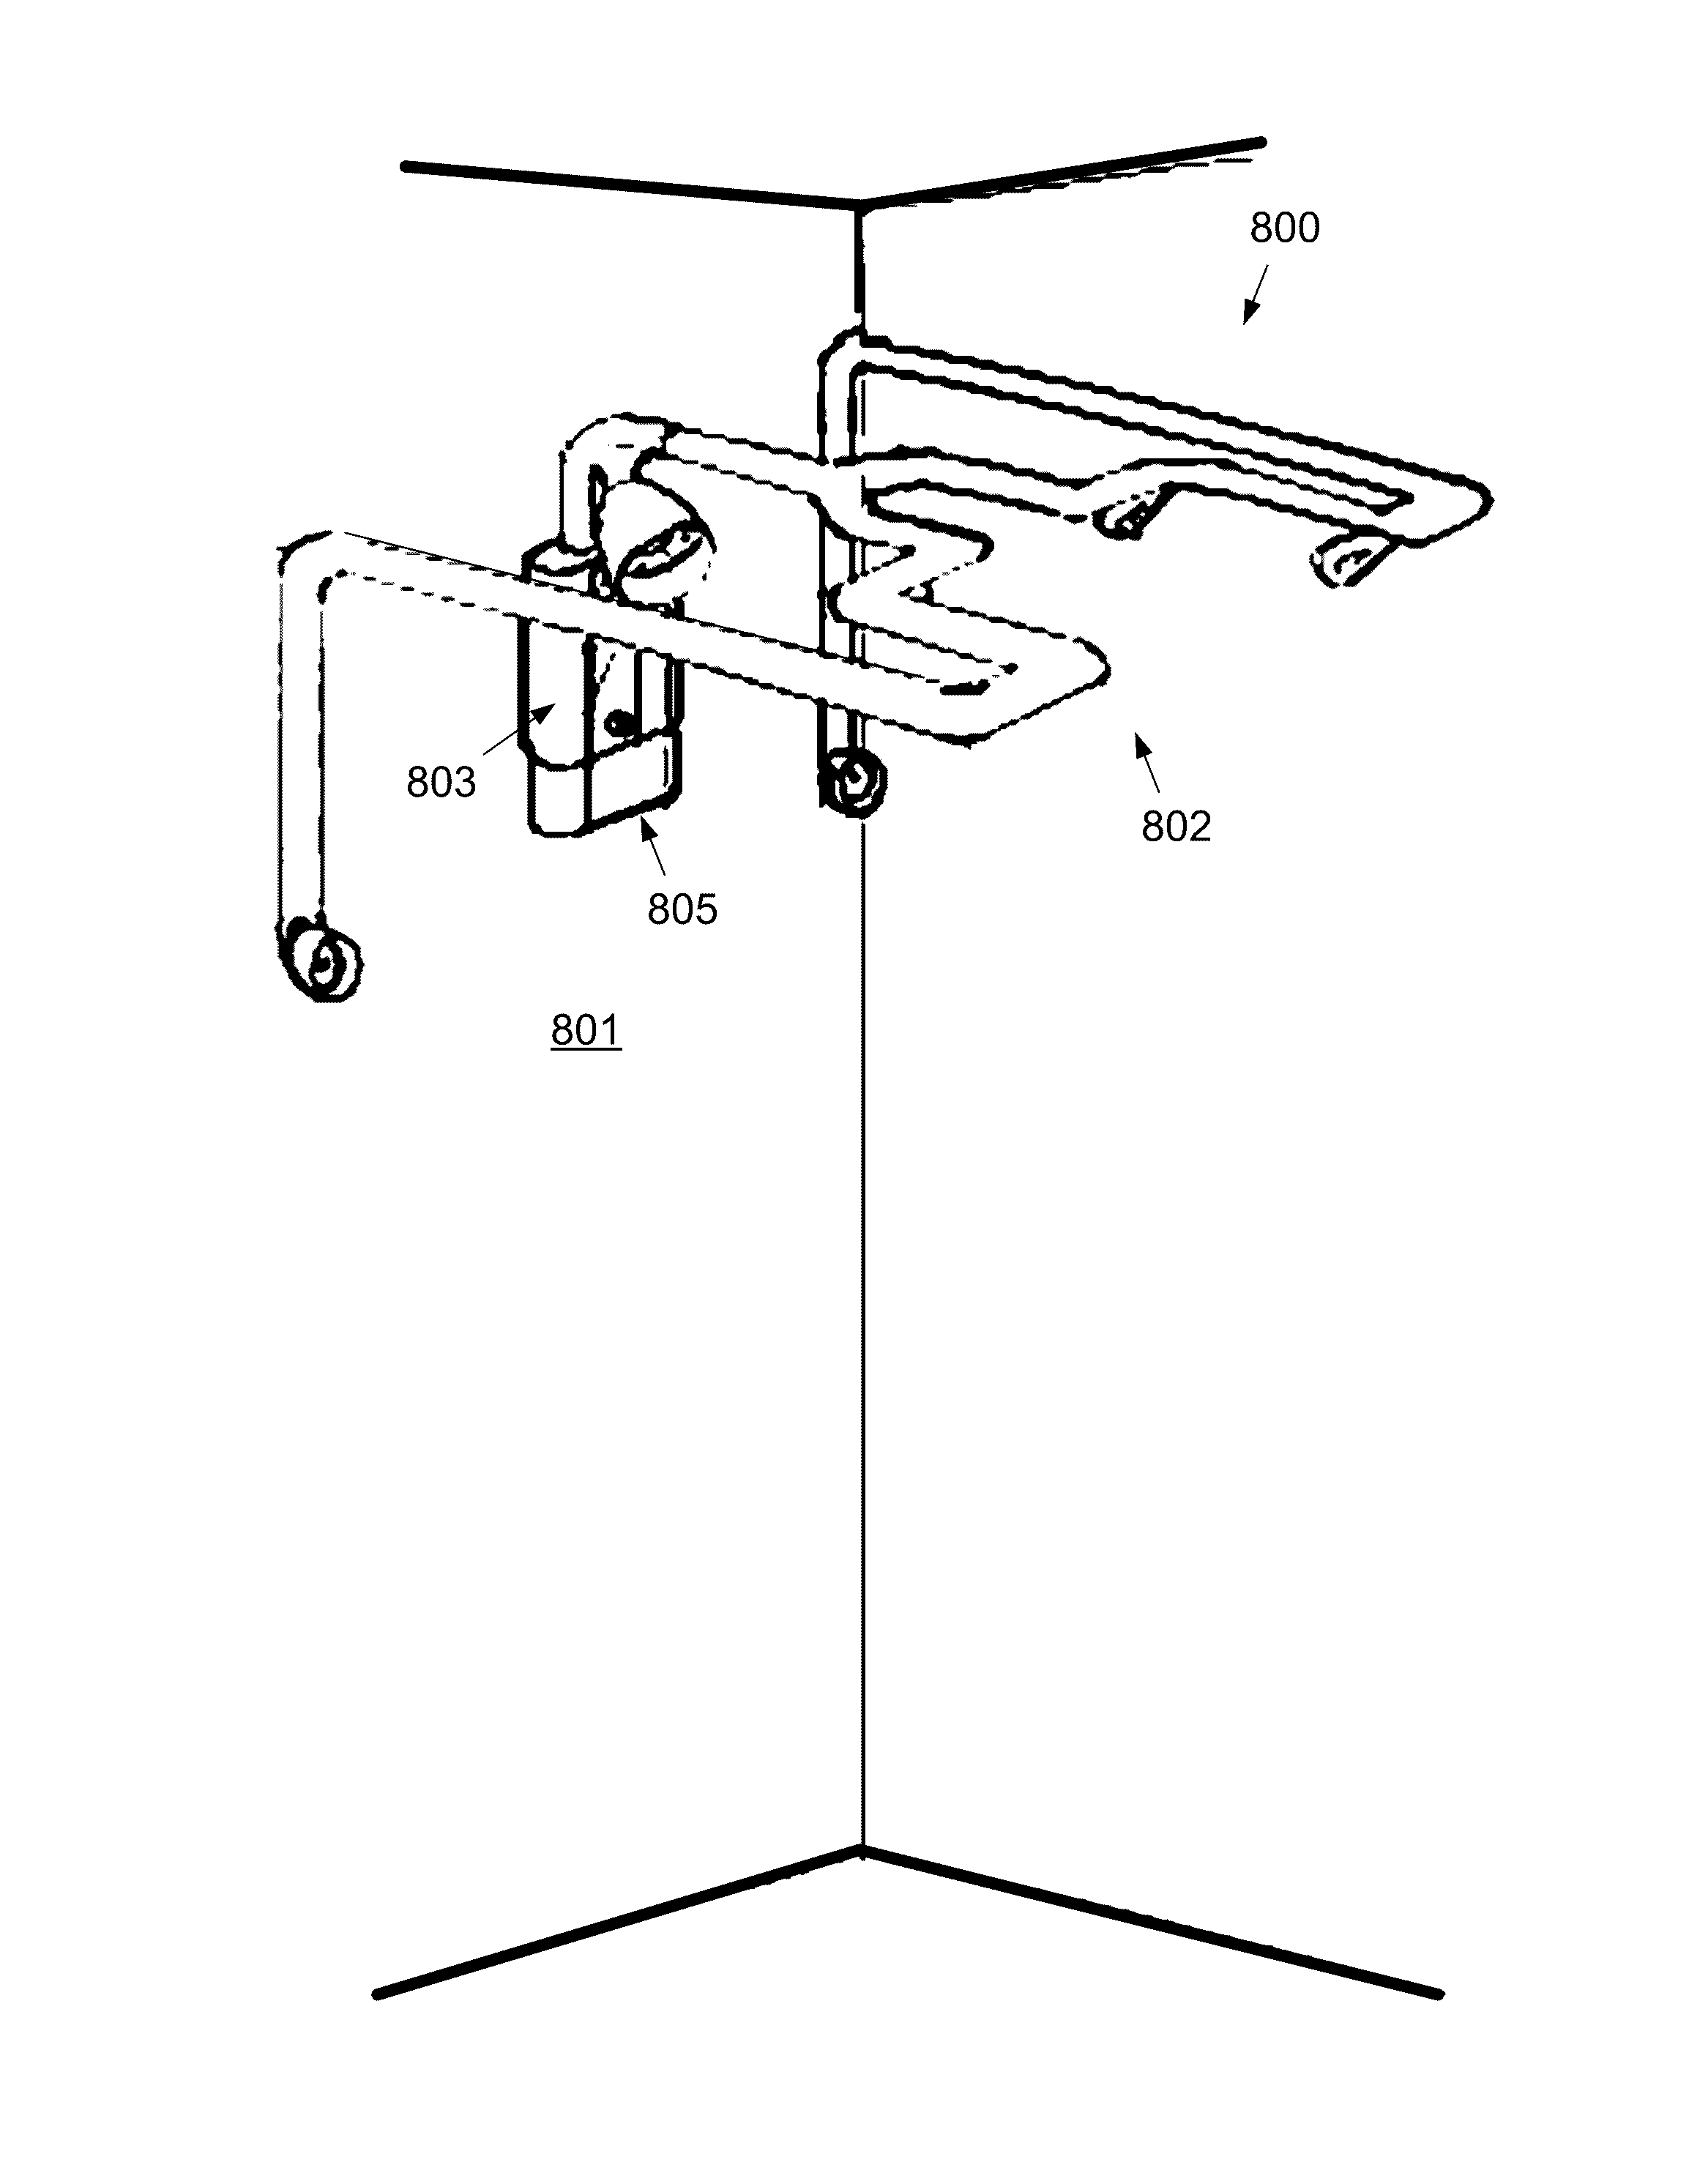 Adjustable height shower apparatus with multiple shower sprayers